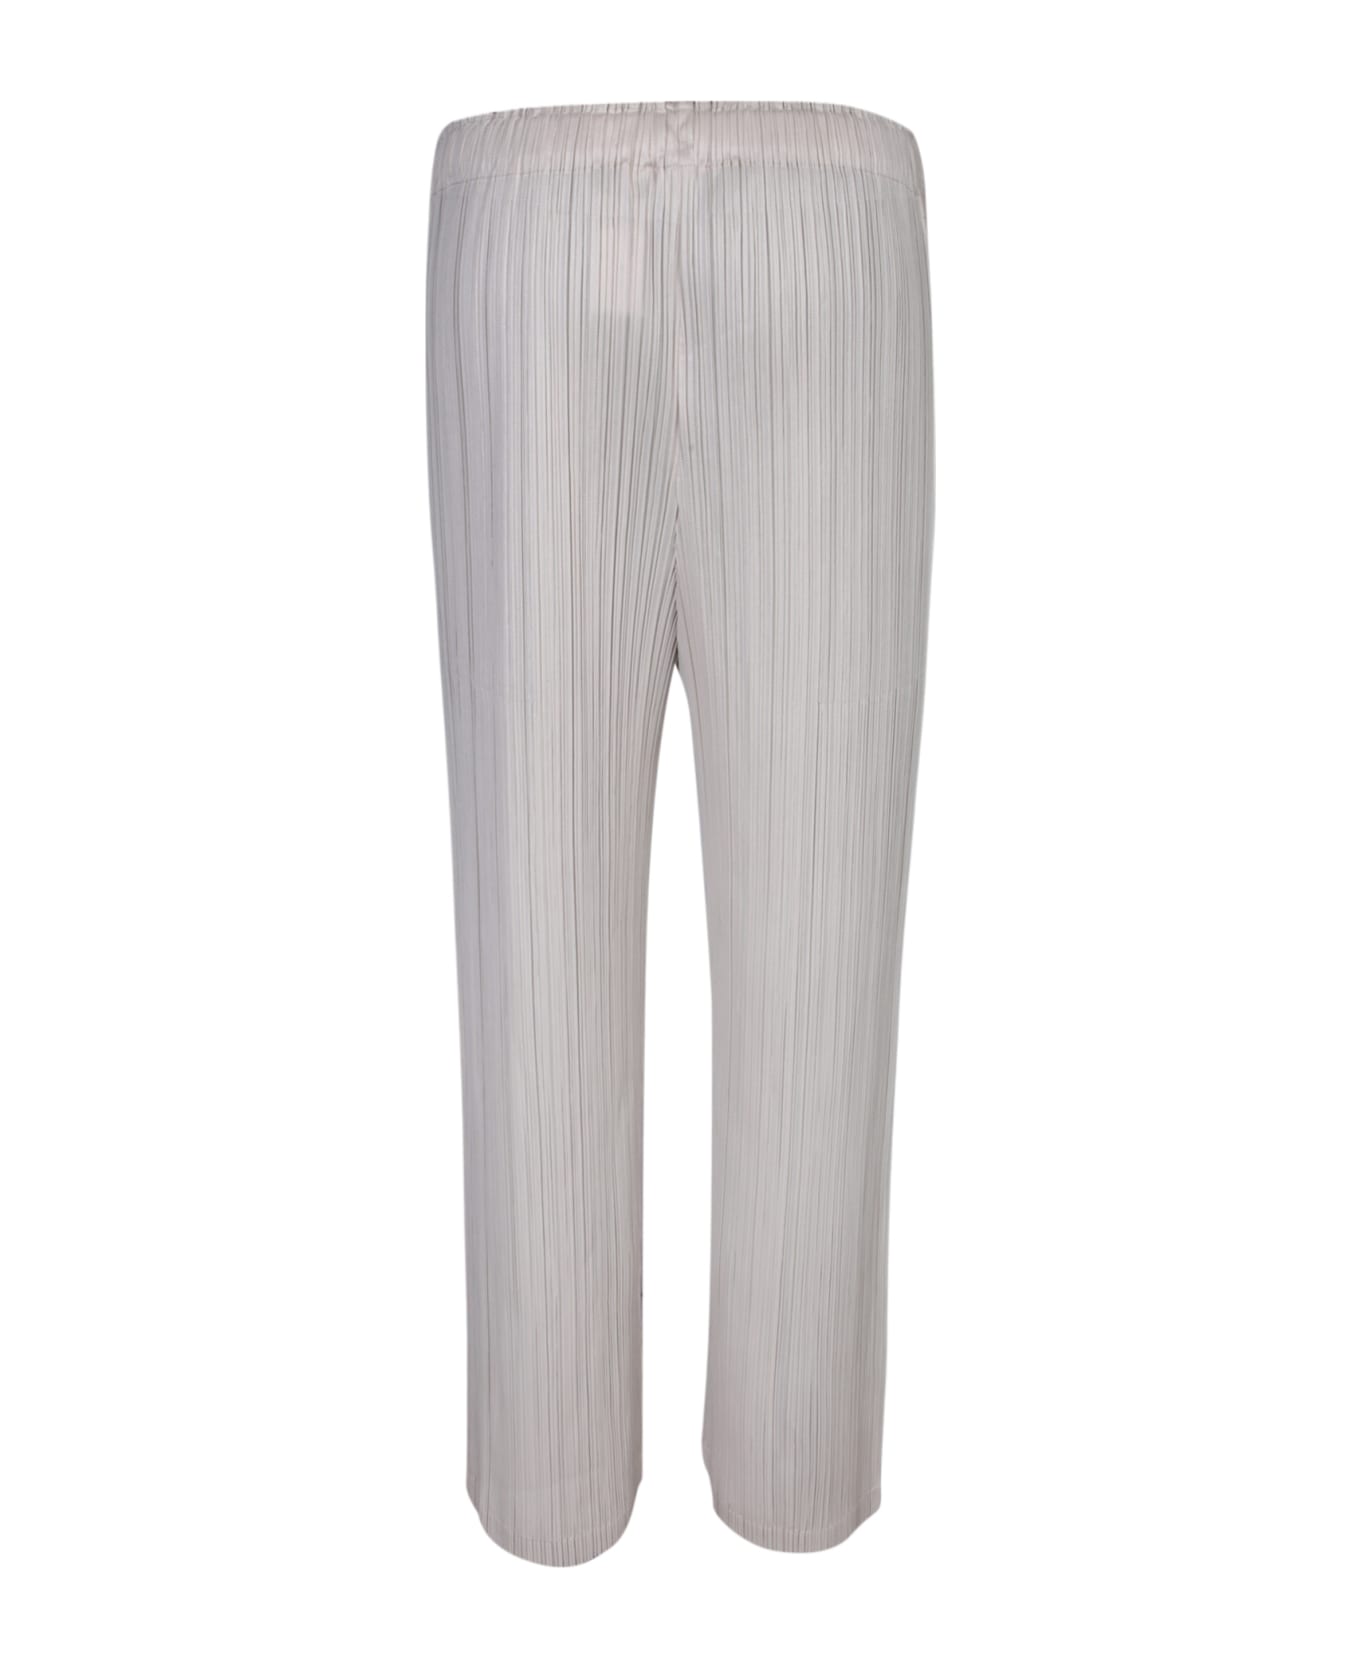 Issey Miyake Pleats Please Ivory Straight Trousers - White ボトムス